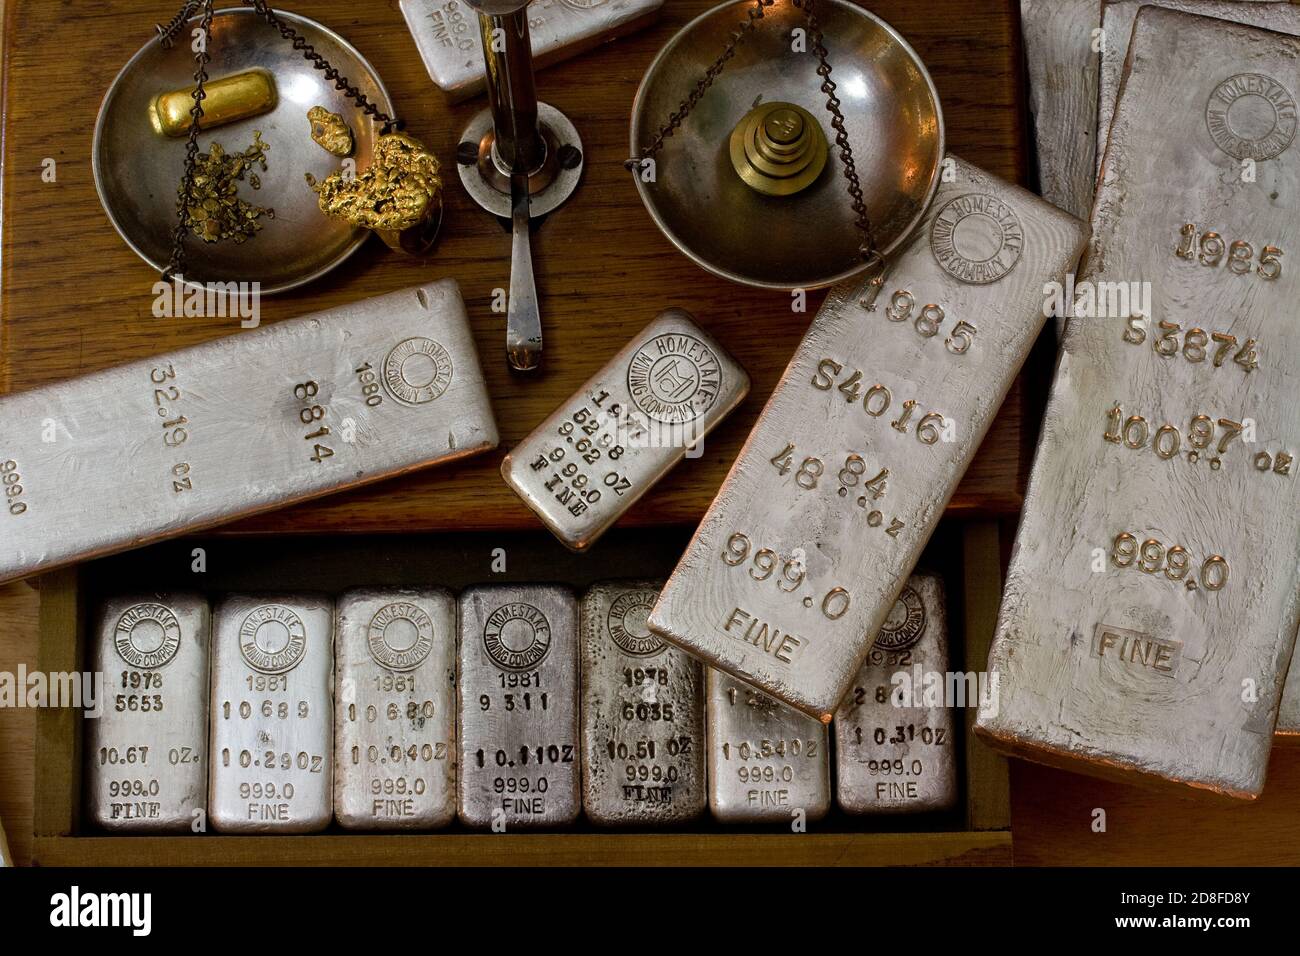 Homestake Mining Company silver bullion bars. Now closed mine located at Lead, South Dakota - Black Hills, USA. Gold bar and nuggets on balance scale. Stock Photo